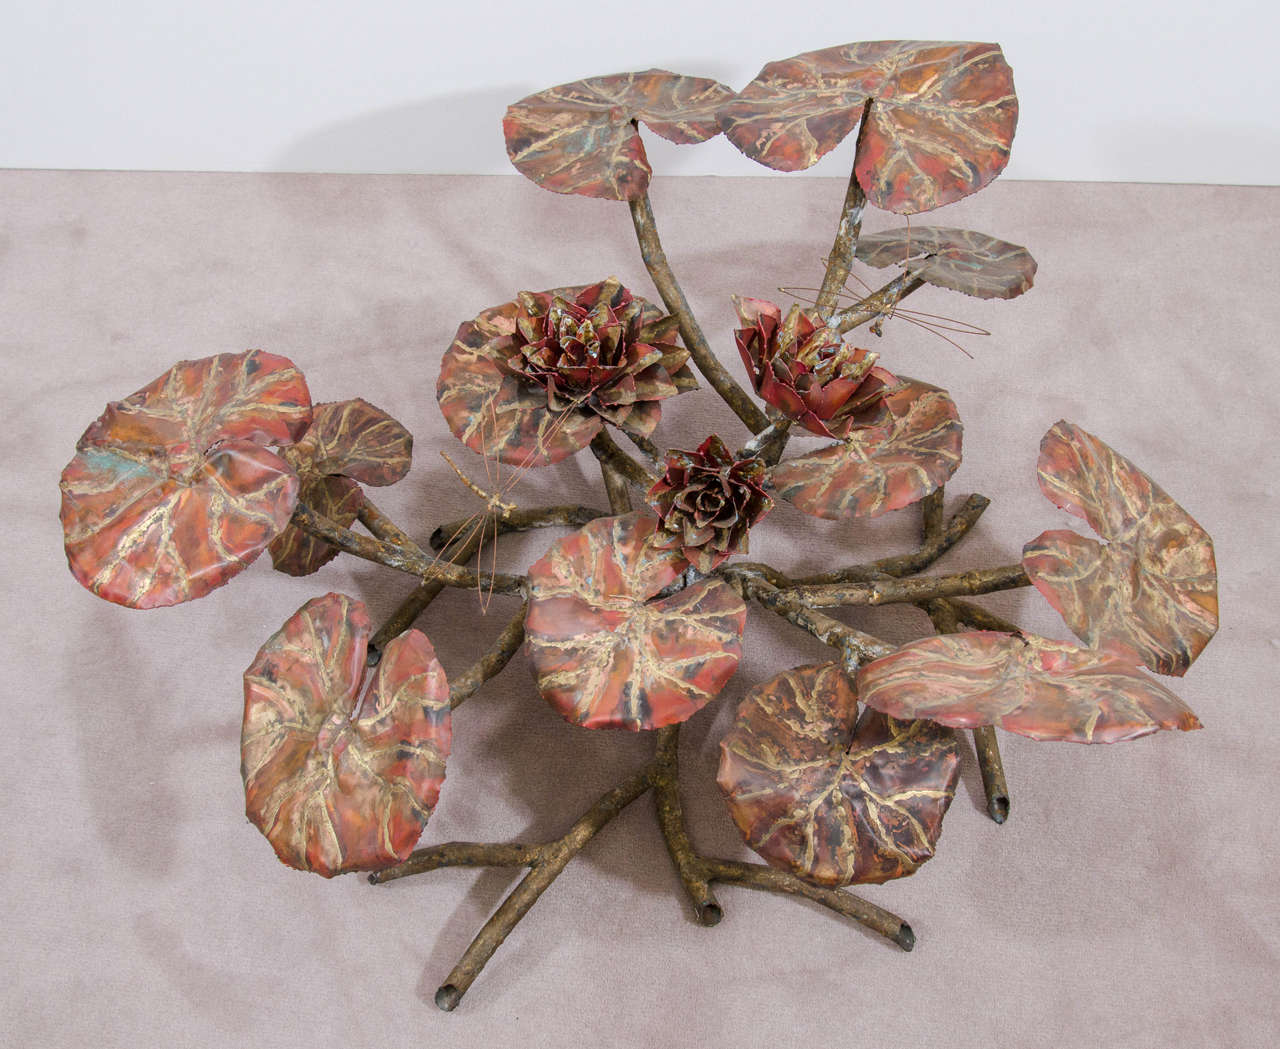 A vintage hand-wrought lily pad sculpture with dragonfly in the manner of Silas Seandel.

Good vintage condition with age appropriate patina.